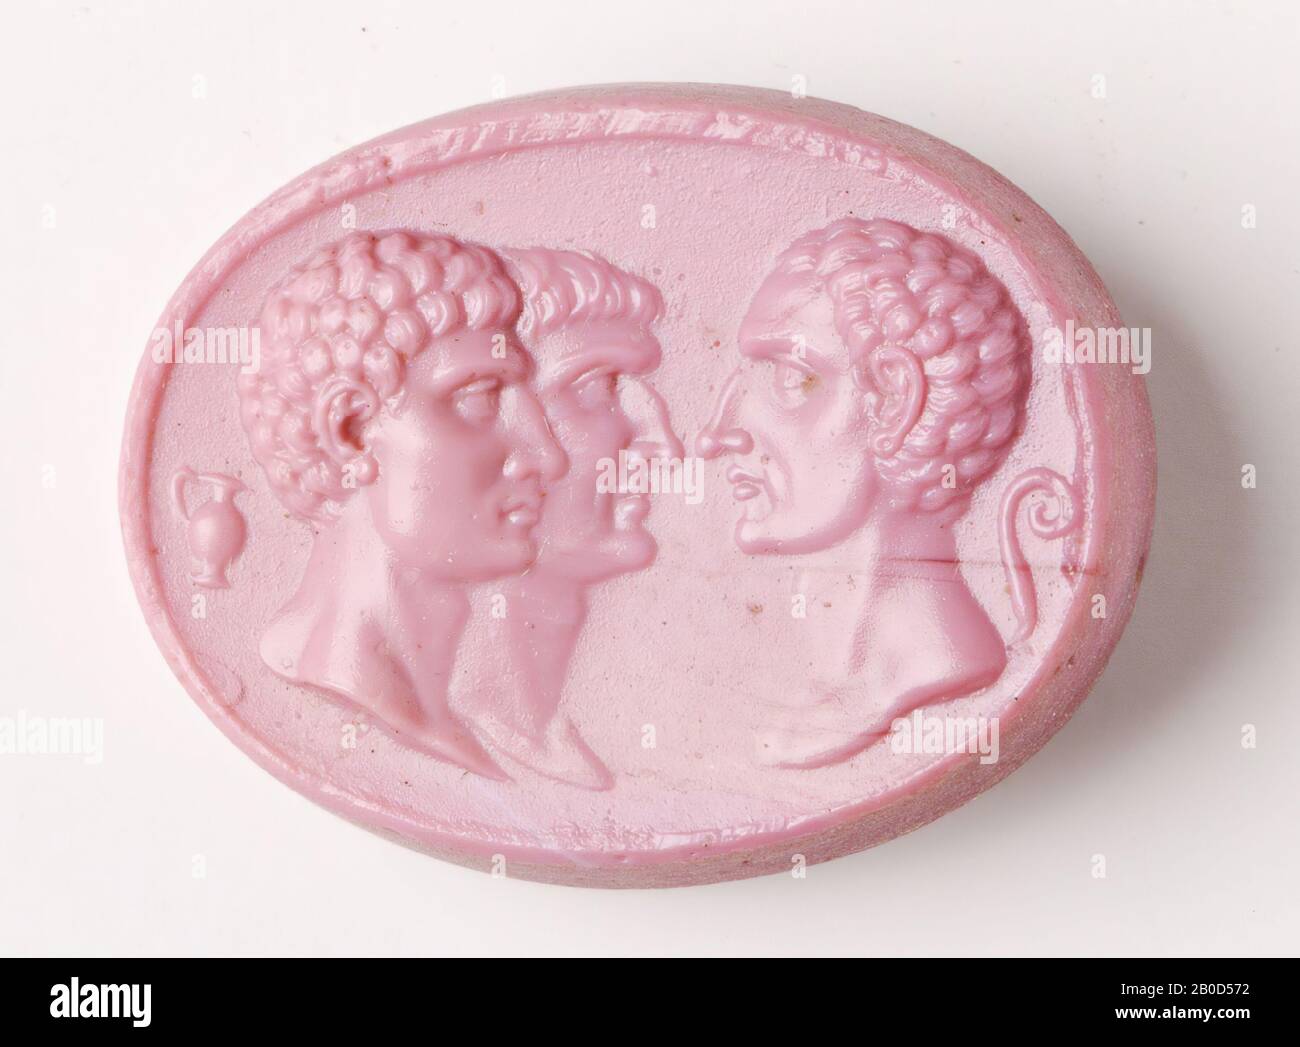 Vz: the person in the foreground link has curly hair, the person left in the background has straight hair, behind both heads there is a jug, the person on the right has a receding hairline and a powerful nose, behind the right person stands a lagobolon., cameo, glass paste with some impurities, Color: pink, Shape: oval, Processing: edge is straight cut, 25 x 20 x 7 mm Stock Photo